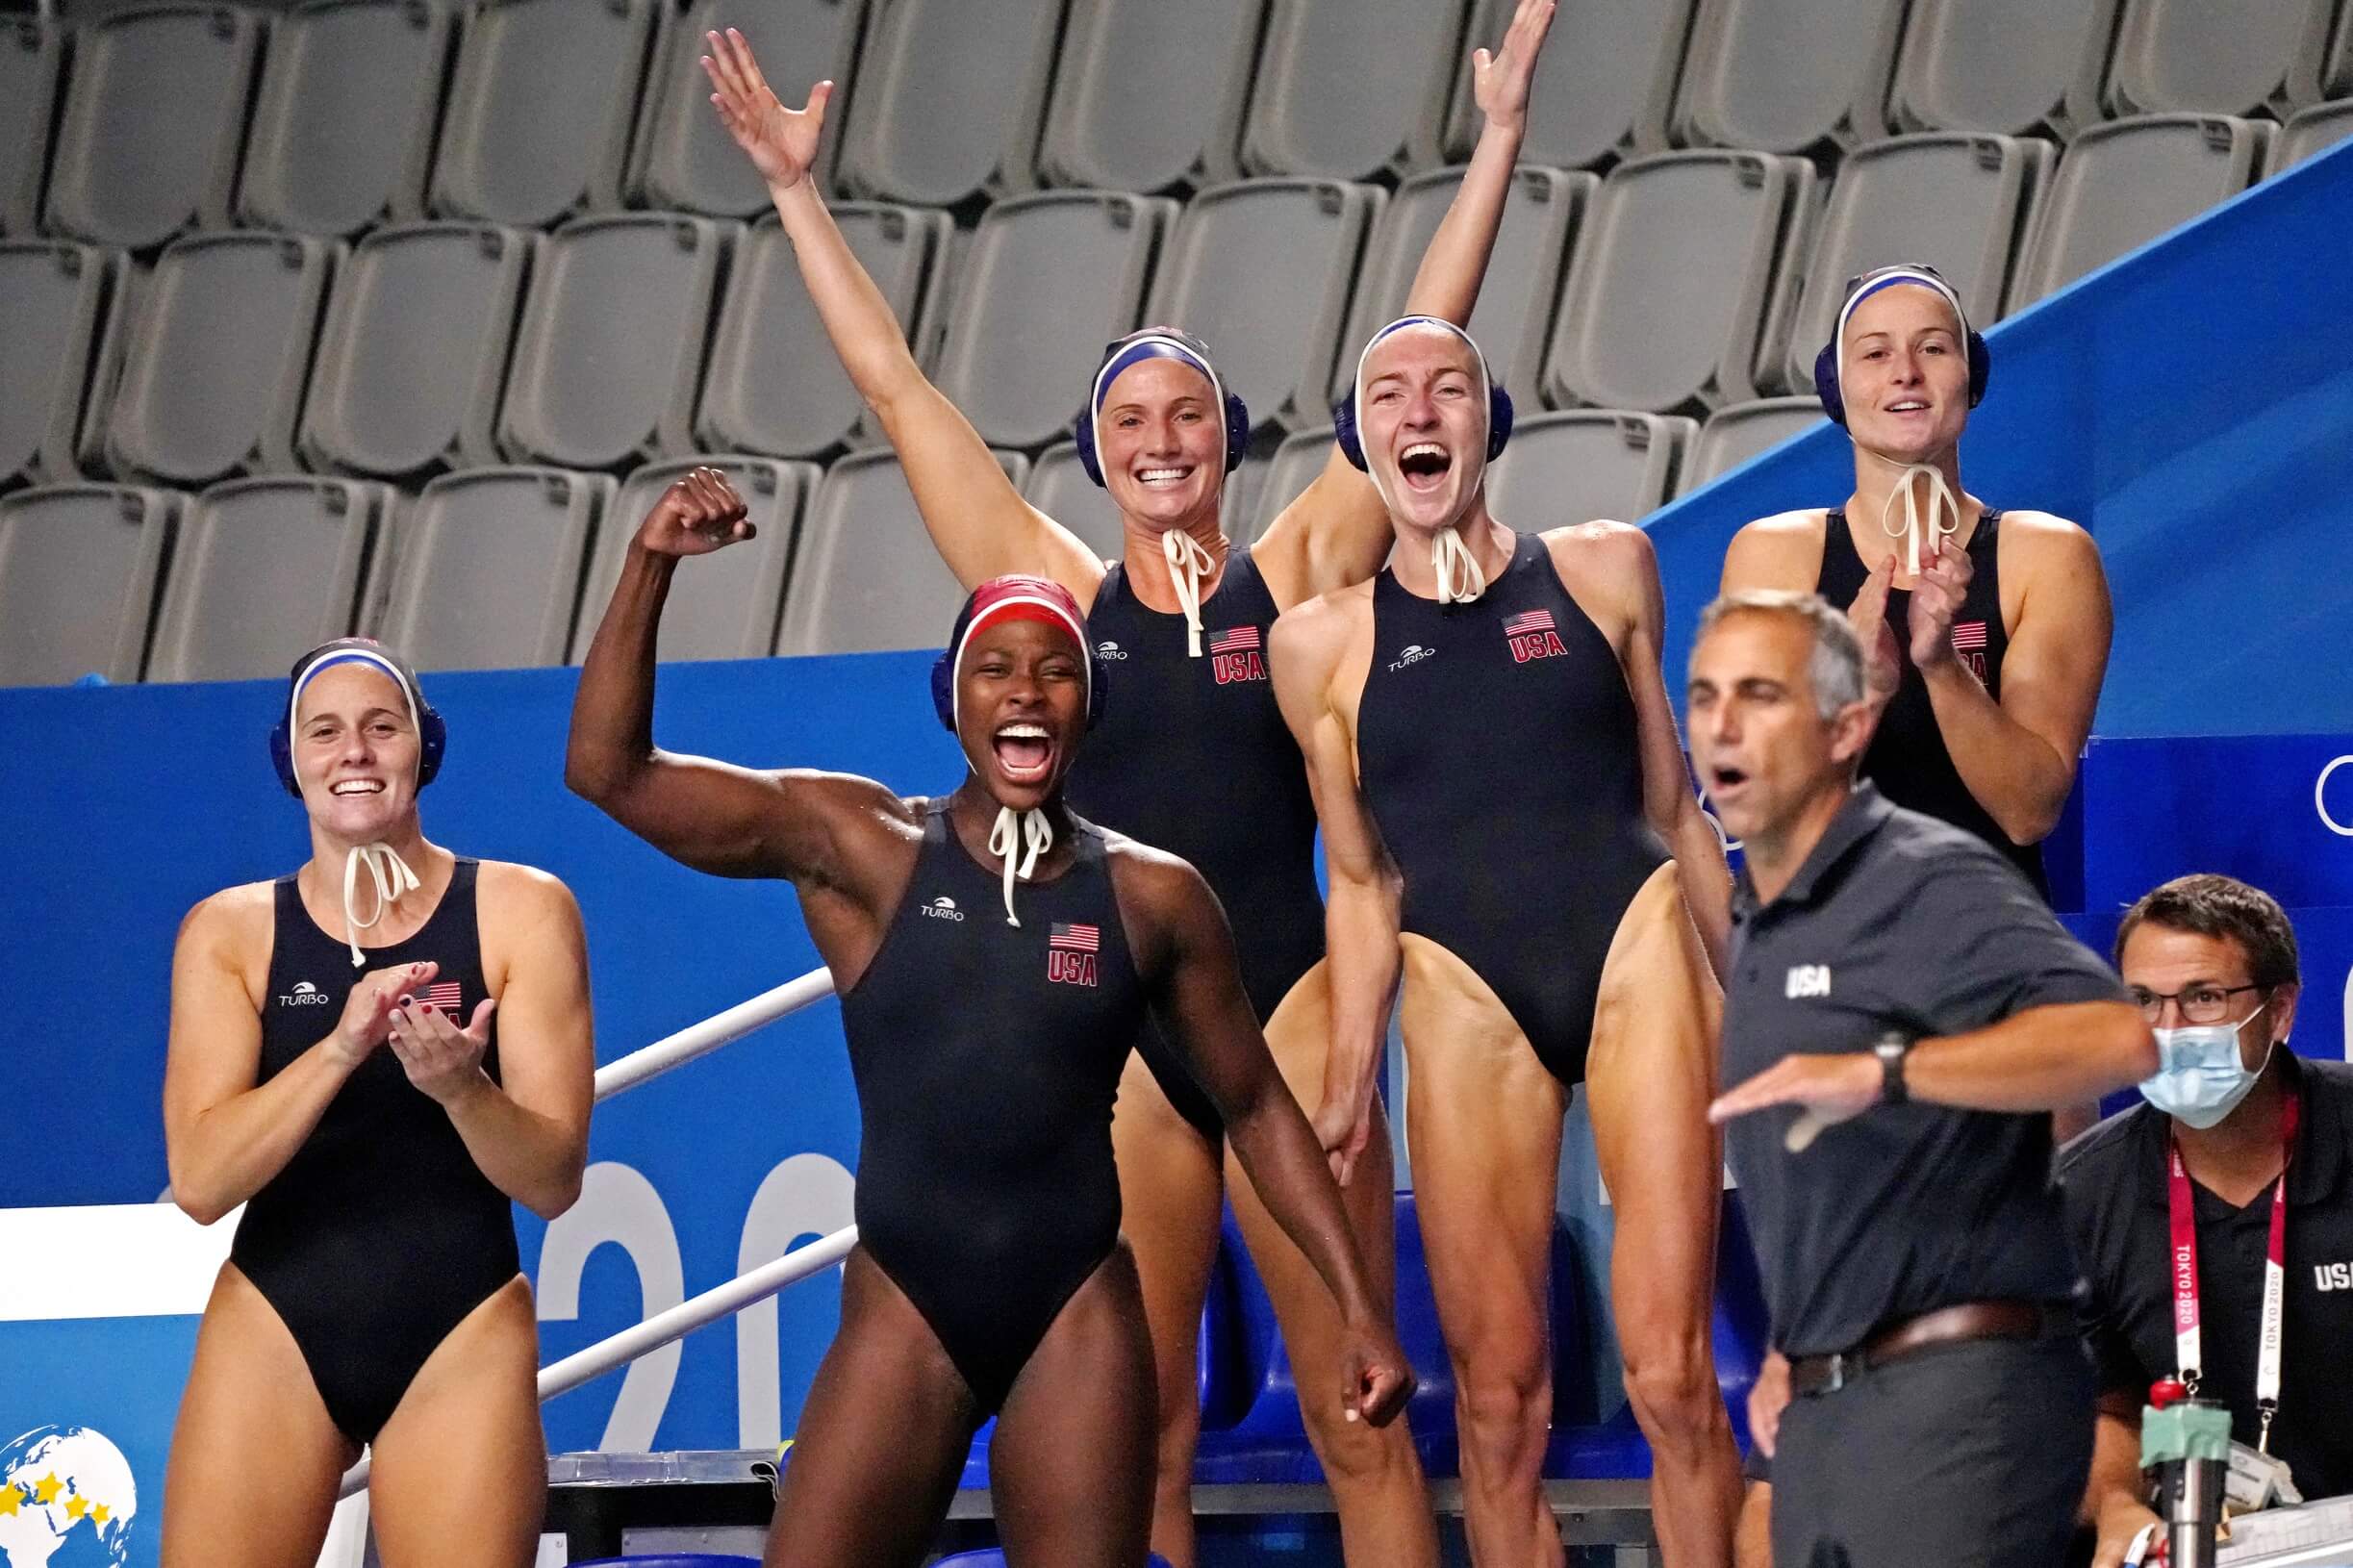 Aug 7, 2021; Tokyo, Japan; The United States bench cheers against Spain in the women's waterpolo gold medal match during the Tokyo 2020 Olympic Summer Games at Tatsumi Water Polo Centre. Mandatory Credit: Robert Deutsch-USA TODAY Sports